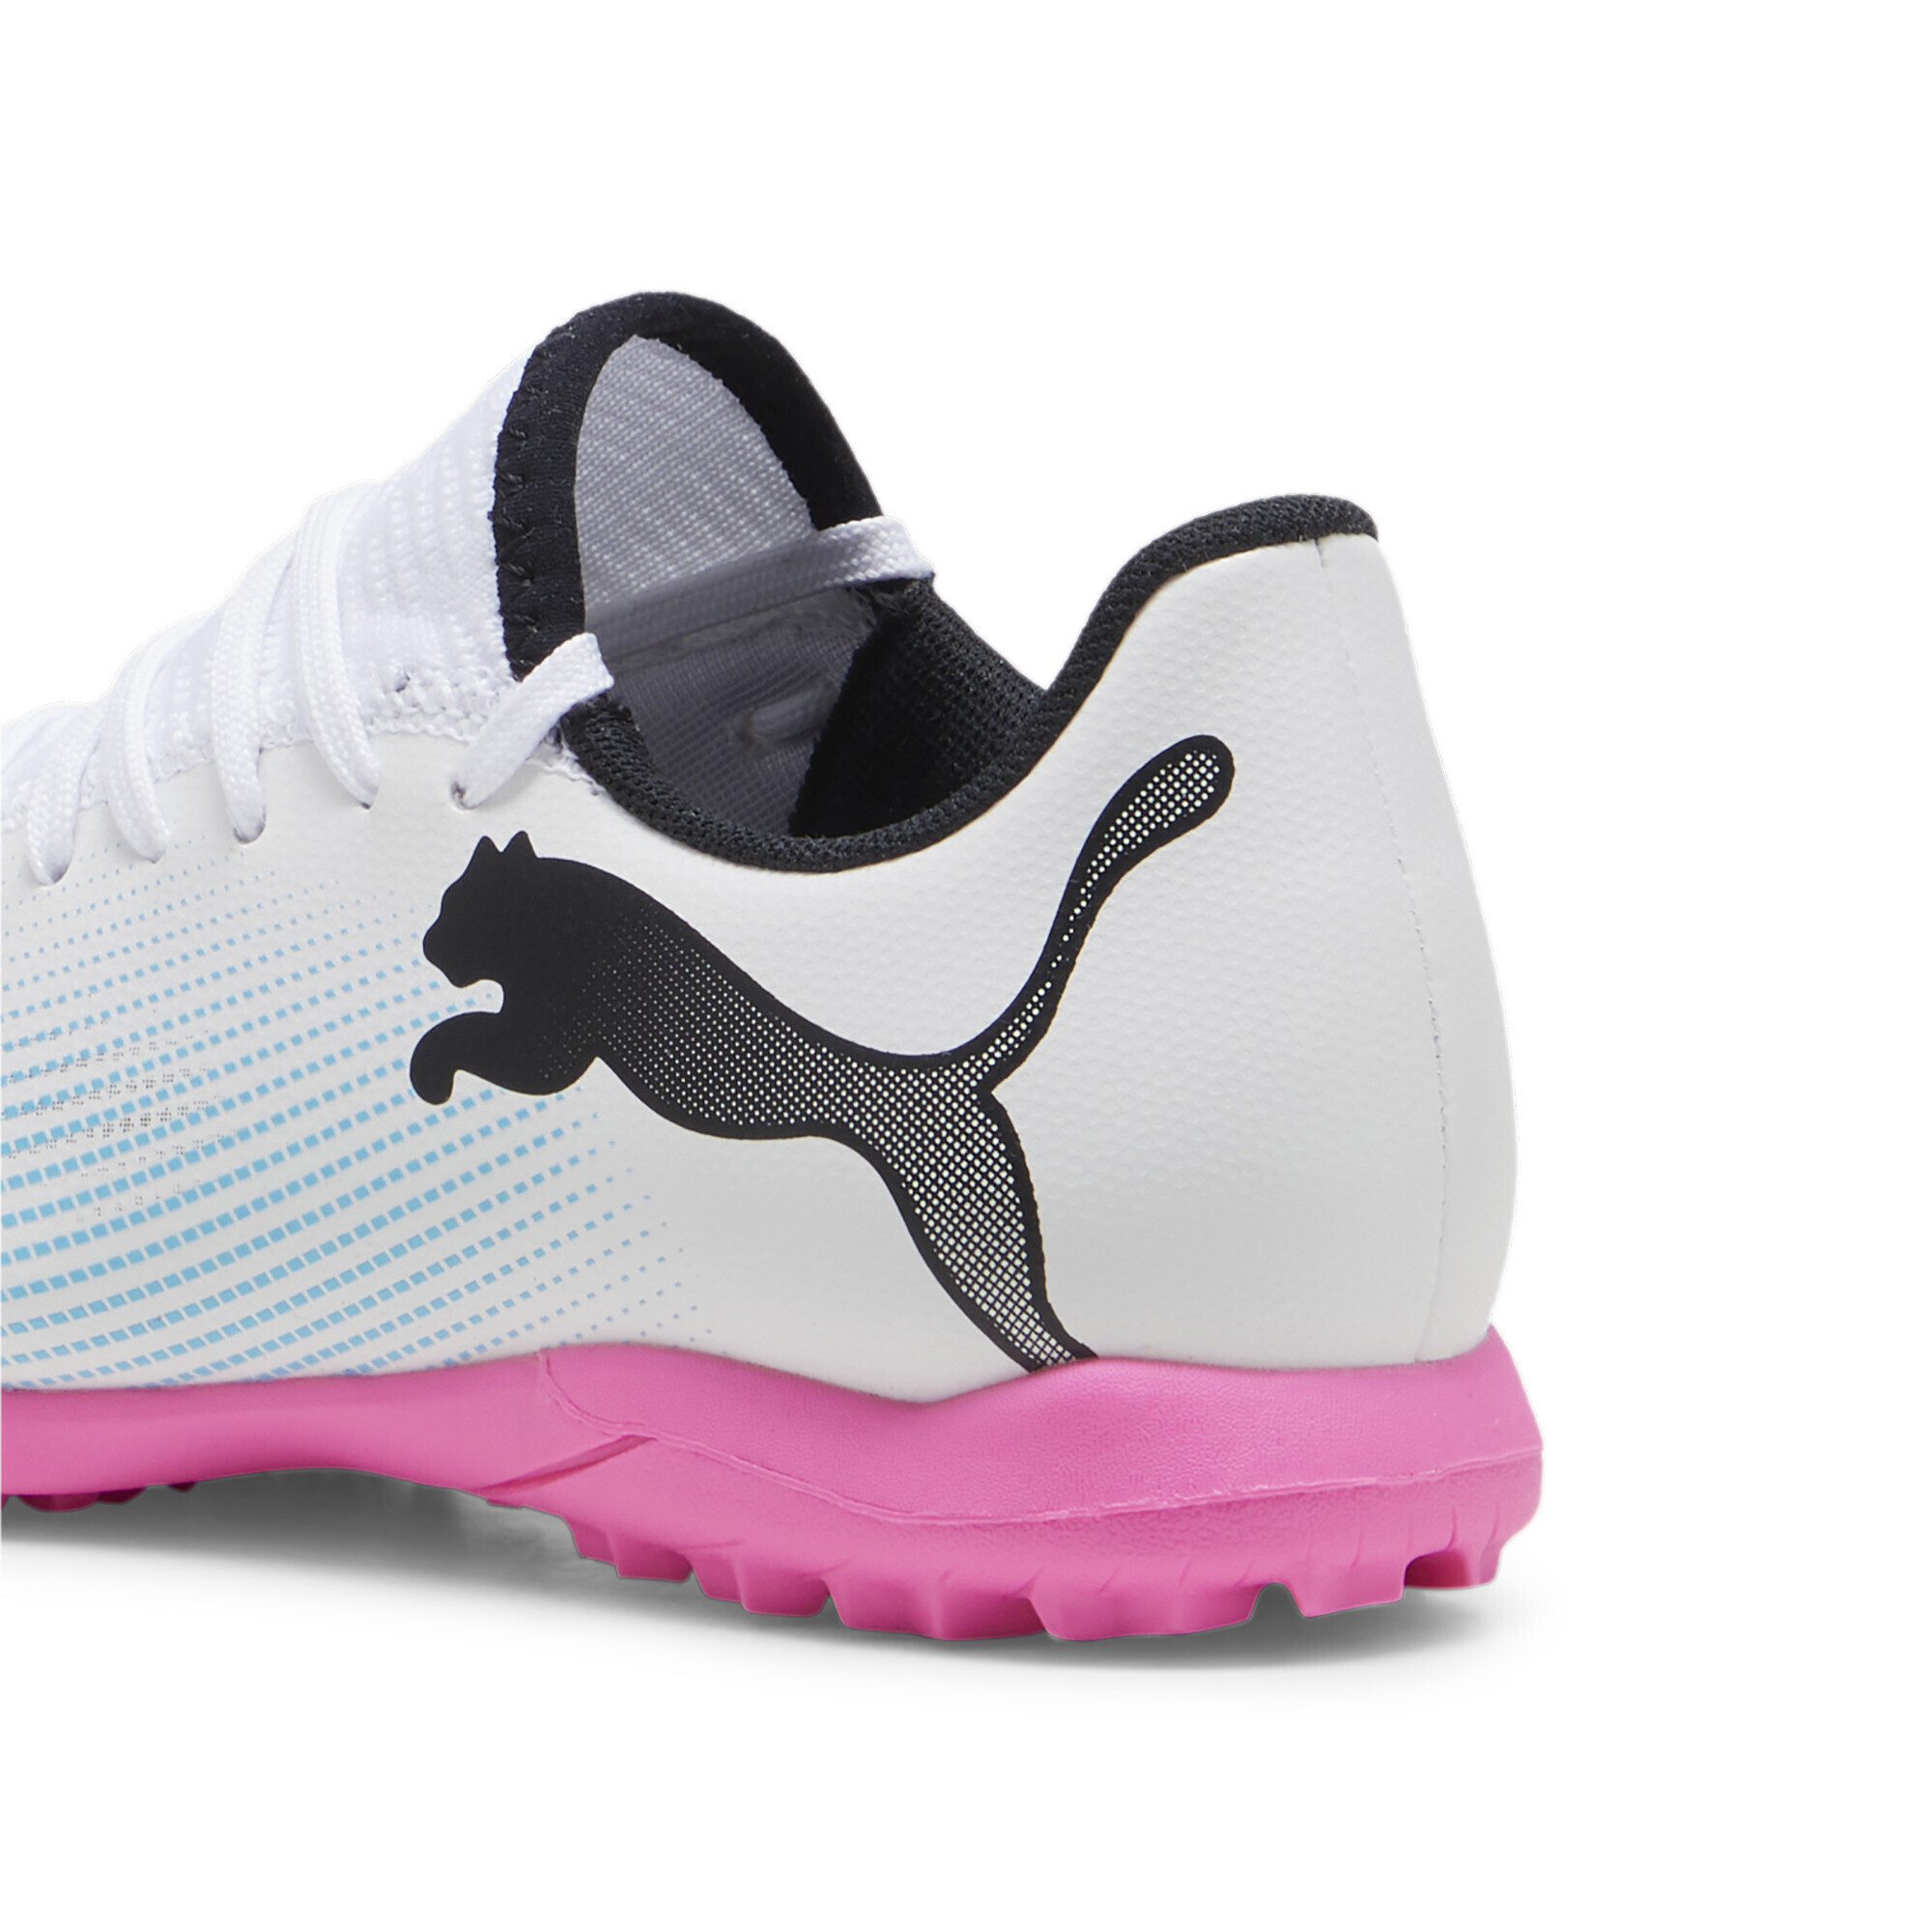 PUMA FUTURE 7 PLAY TT Youth Football Boots In White/Pink, Size EU 37